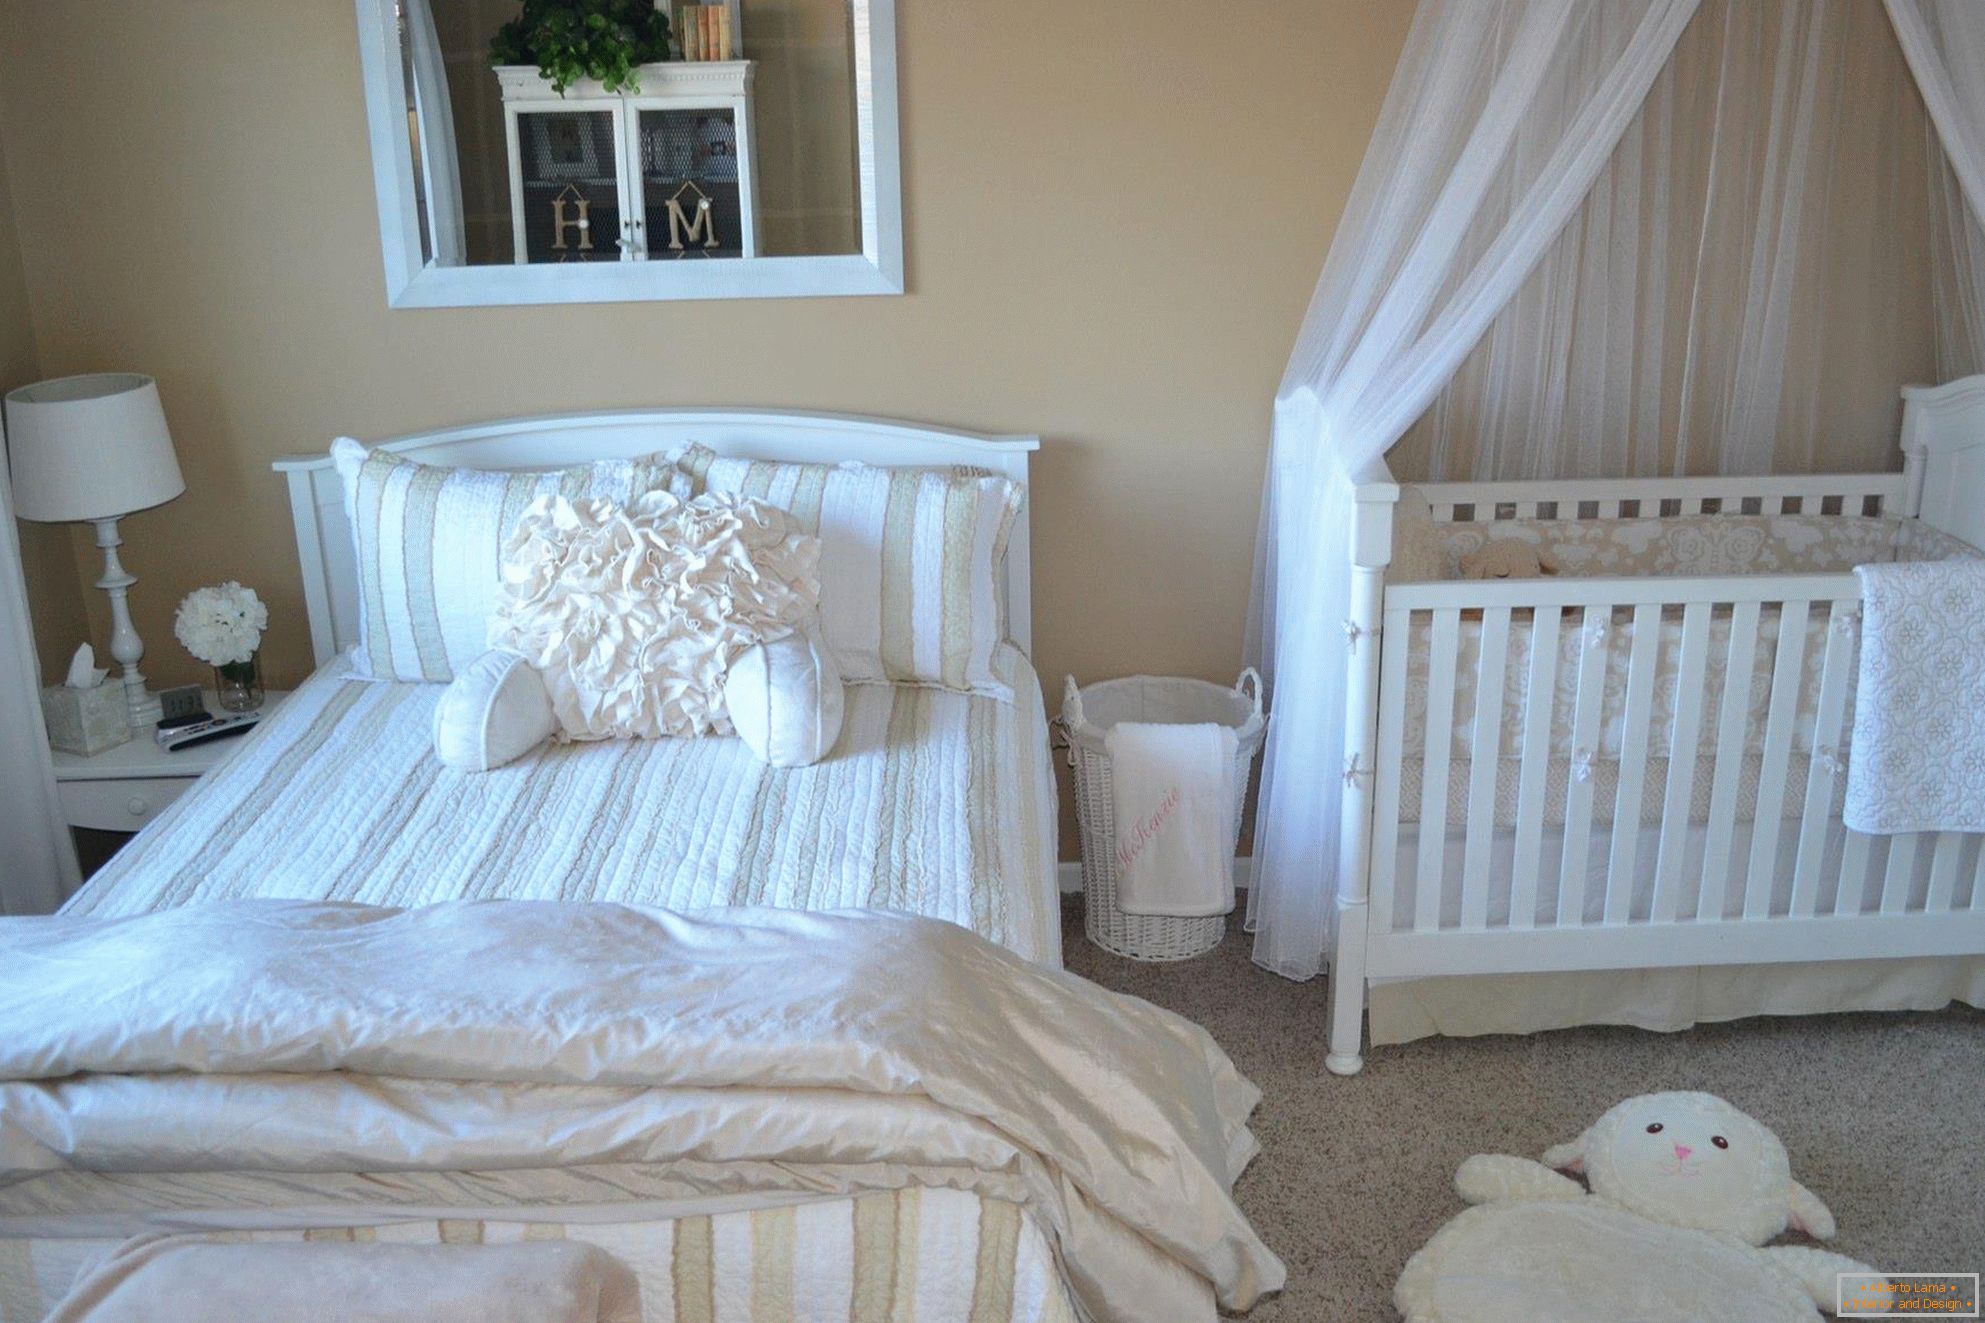 Sand walls and white furniture in the bedroom